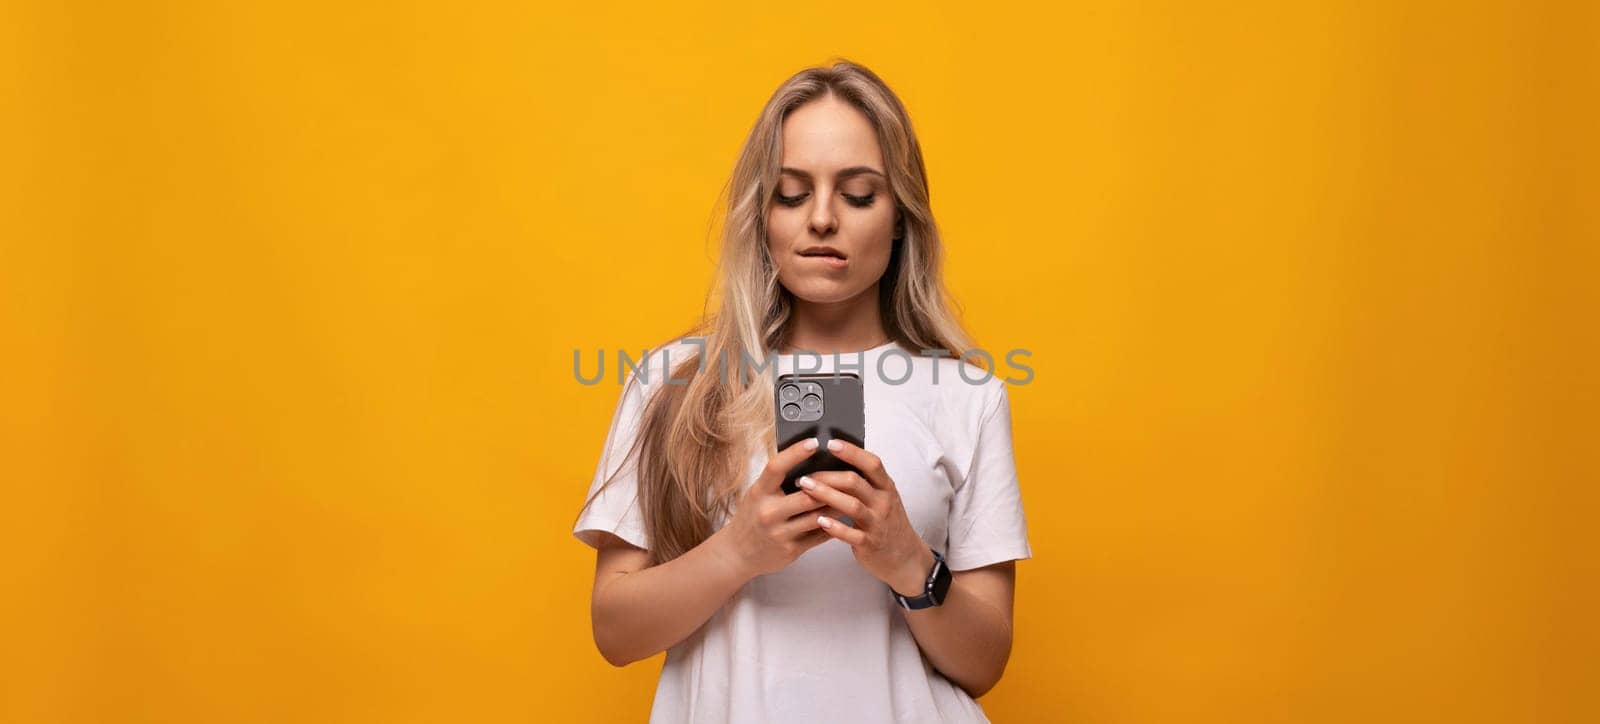 girl with a gadget sits on the Internet on an orange background.